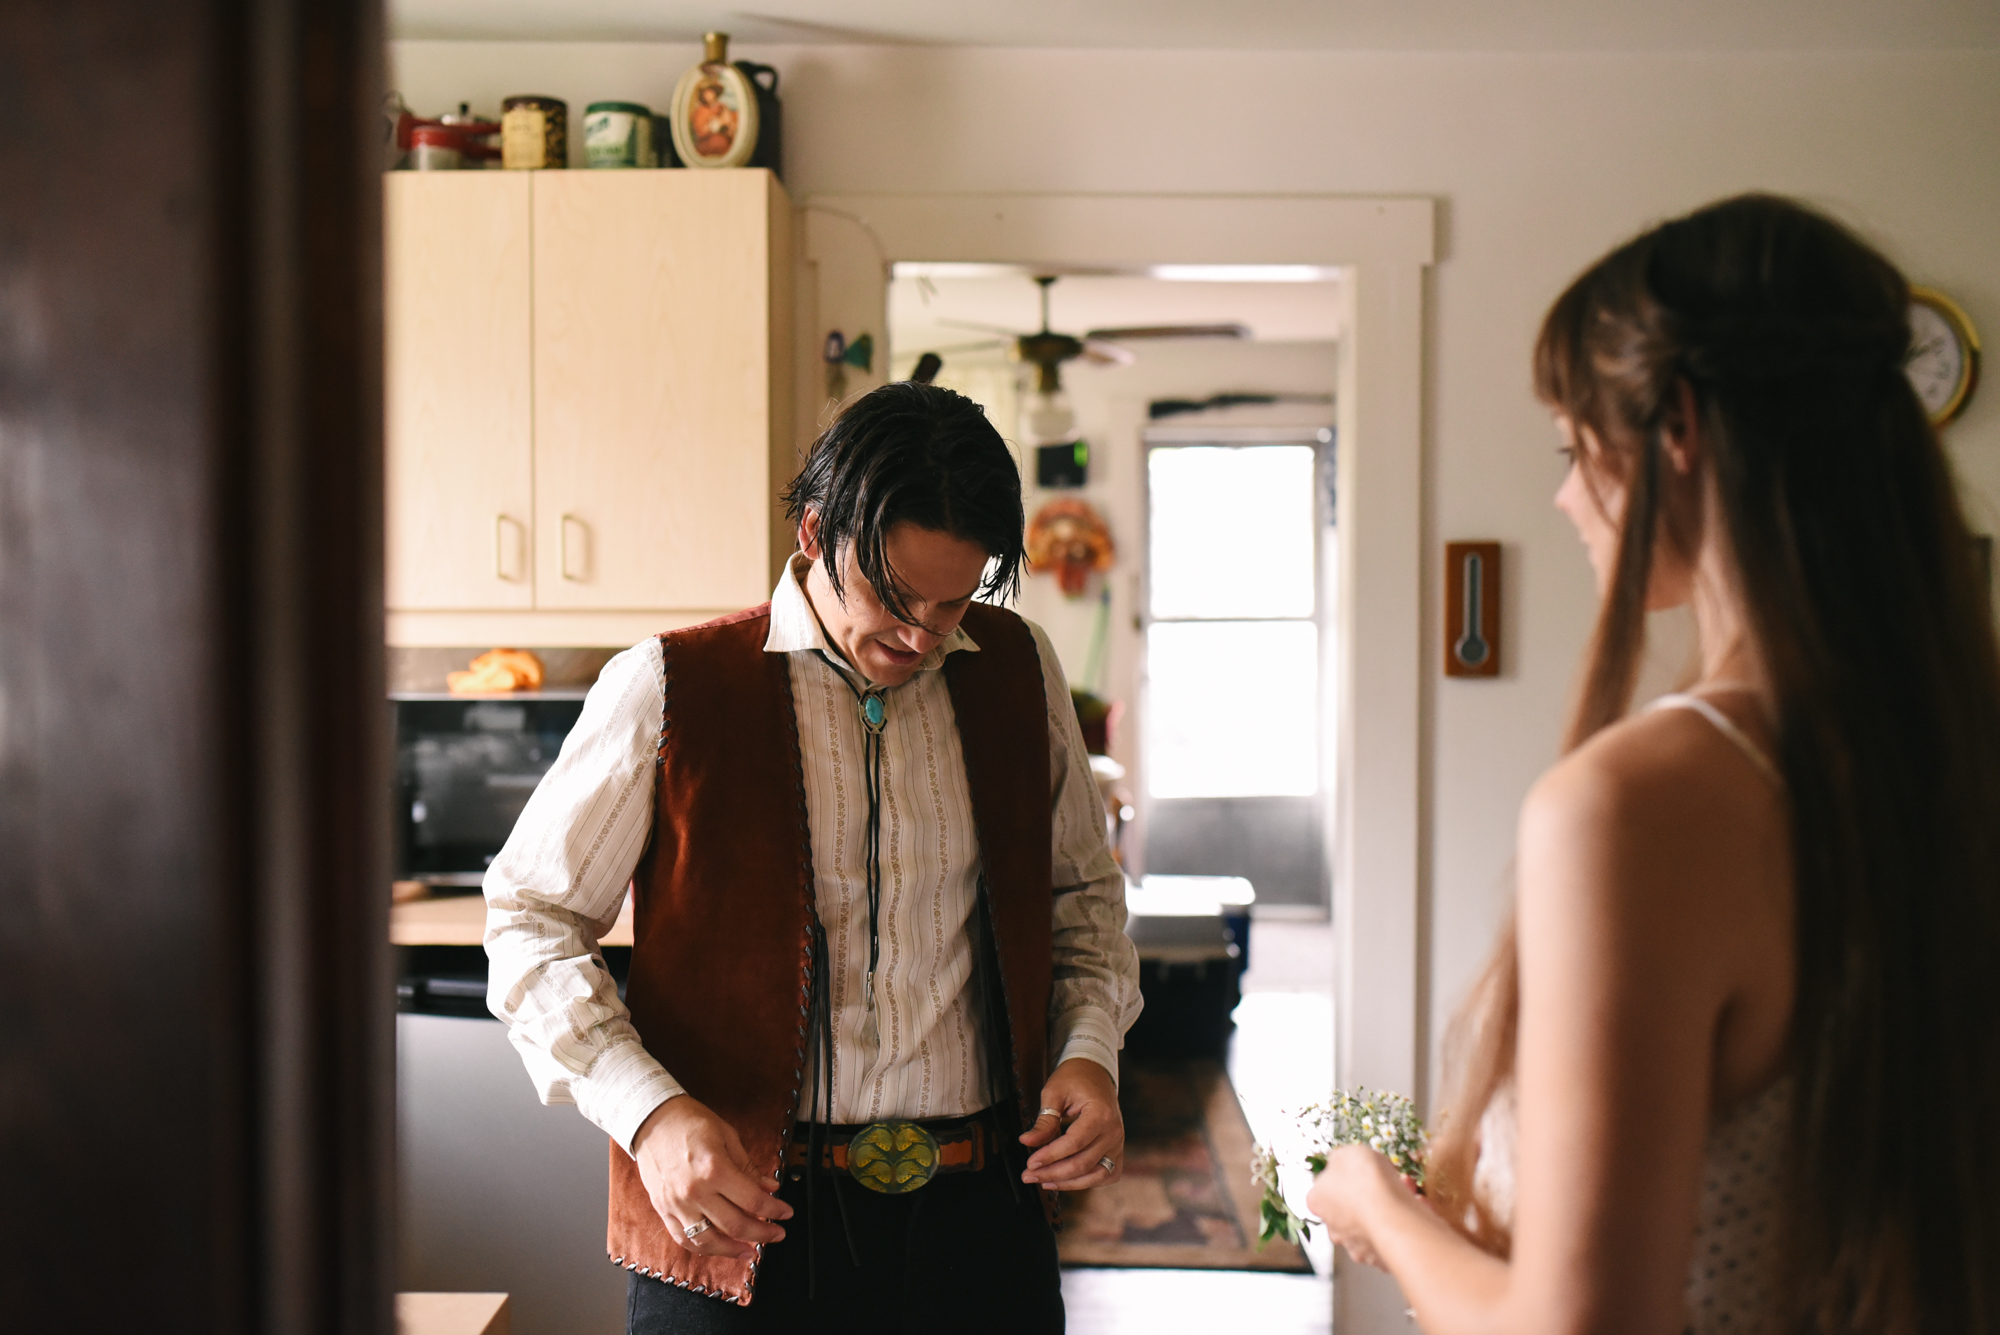  Mountains, Outdoors, Rustic, West Virginia, Maryland Wedding Photographer, DIY, Casual, Bride and Groom getting ready before ceremony 